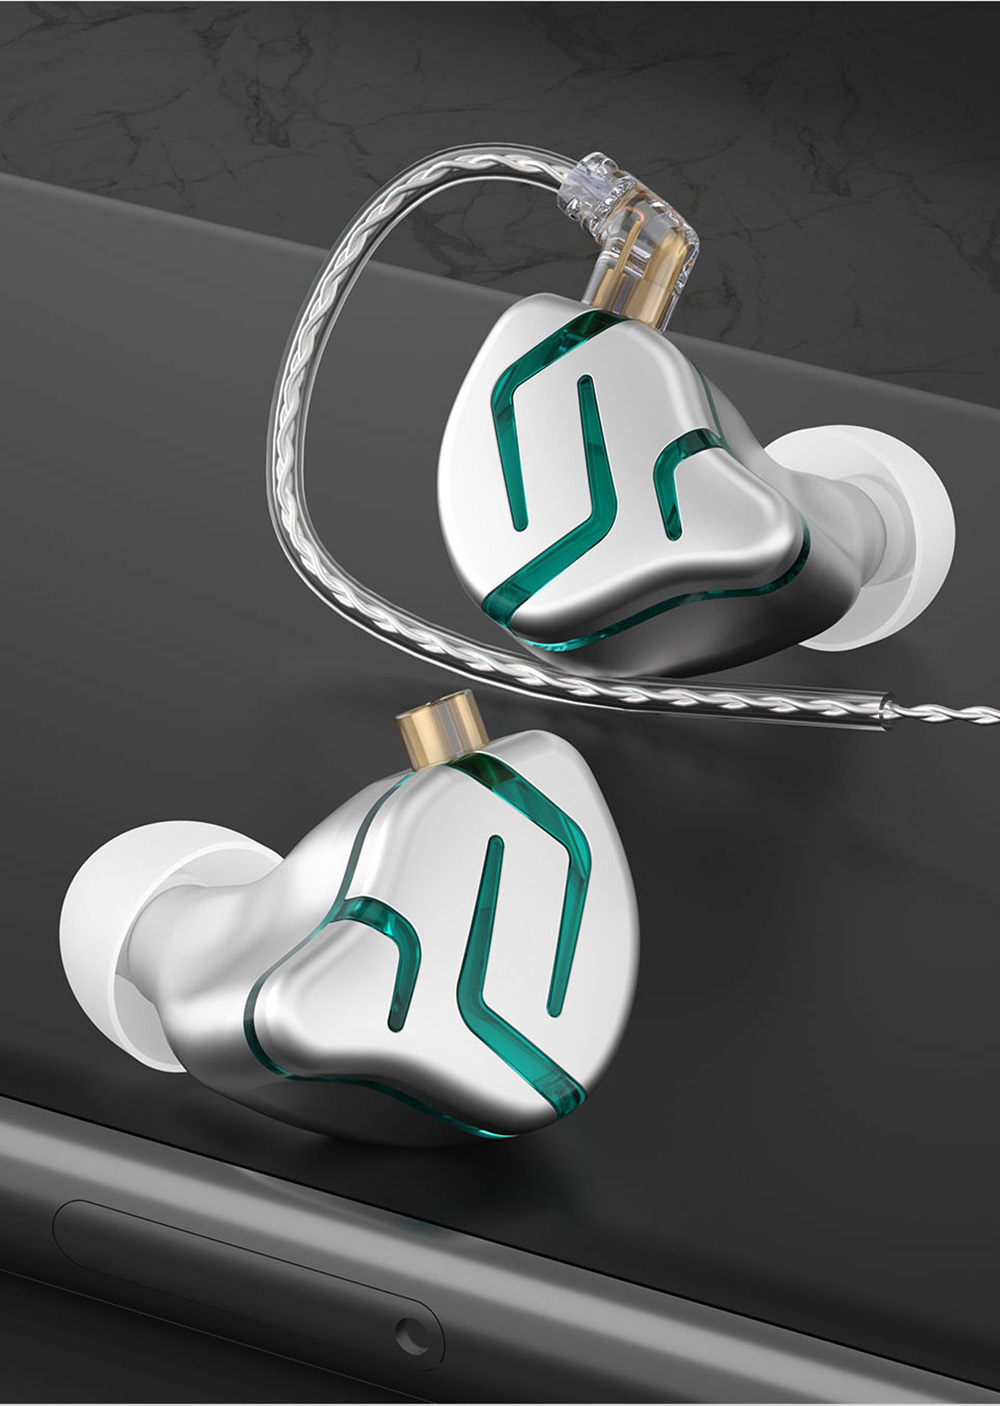 KZ ZES Electrostatic+Dynamic Wired HiFi Earphone Bass Earbuds In-Ear Monitor Noise Cancelling with Mic - Silver